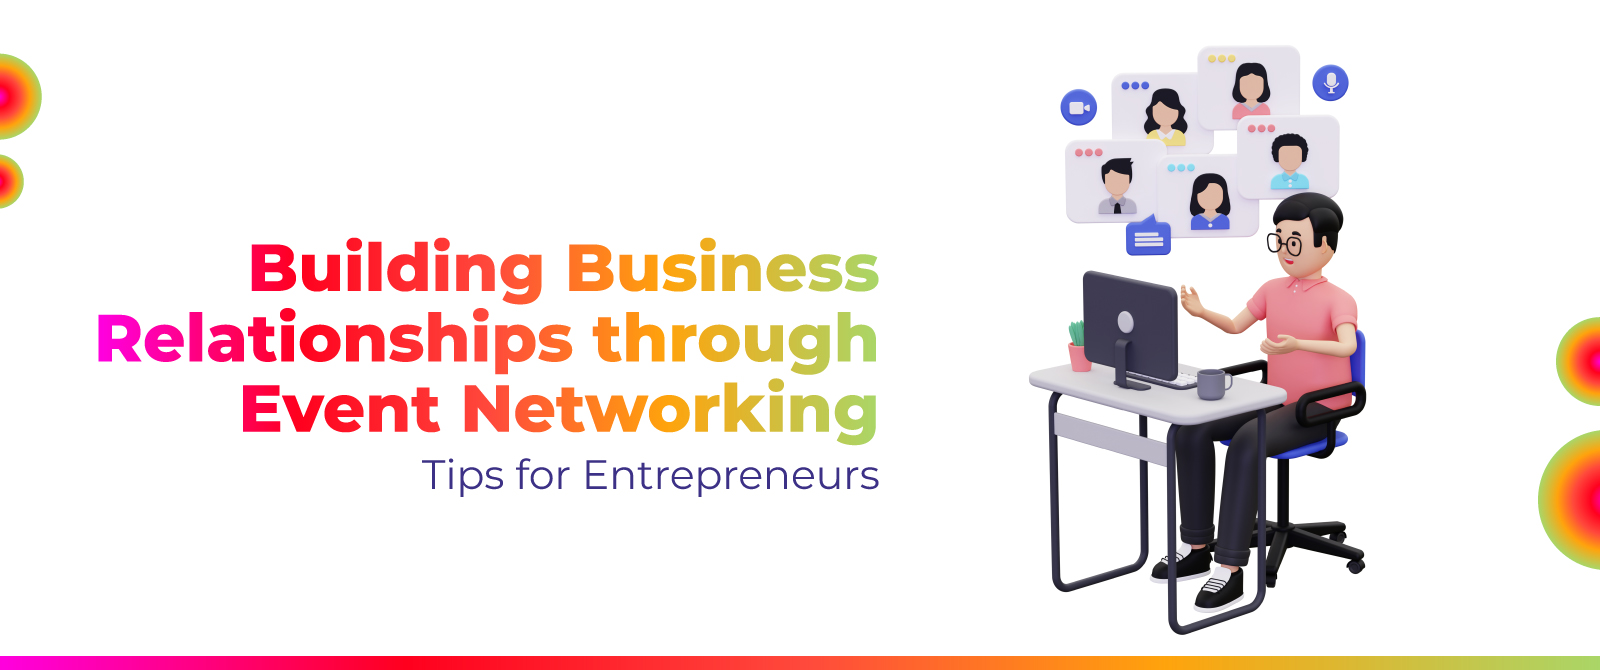 An Event Networking Guide for Entrepreneurs and Businesses